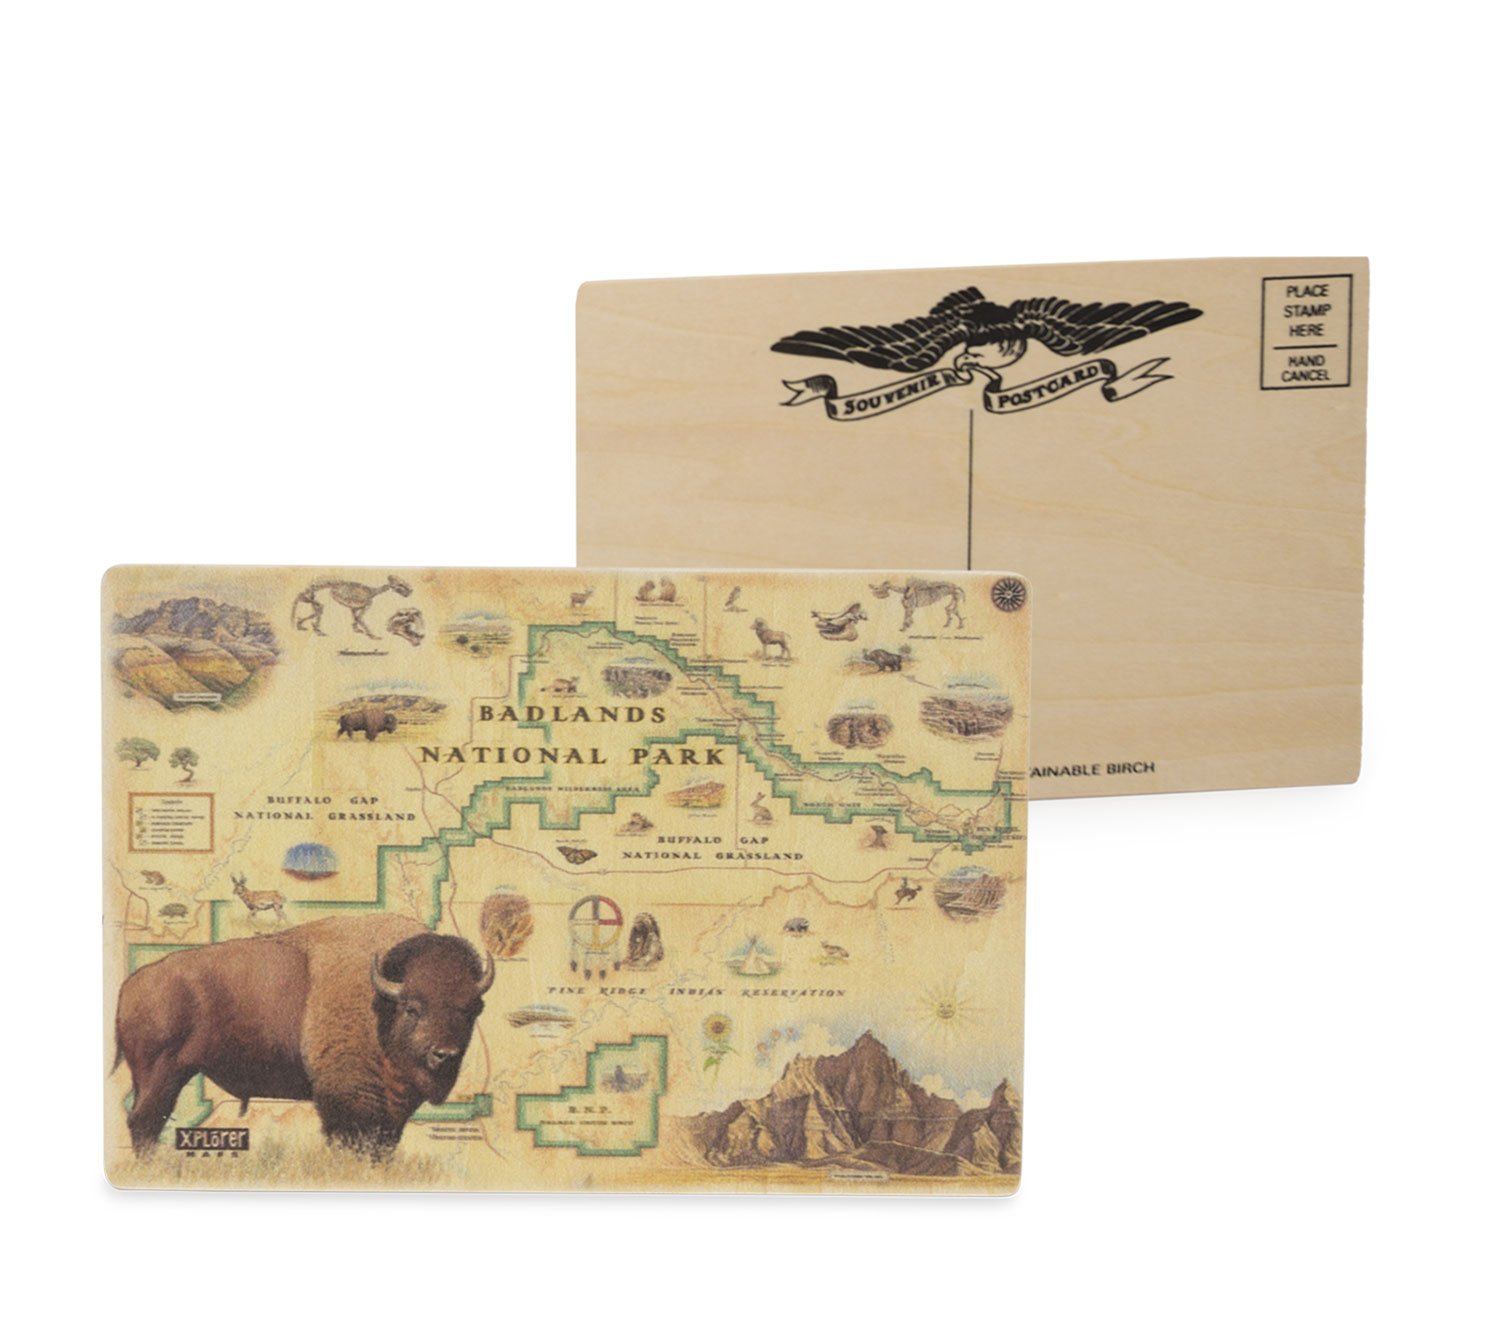 Badlands National Park map wooden mailable mustard in earth tone colors. Featuring buffalo bison, dinosaurs, flower, fox, sheep, eagle.